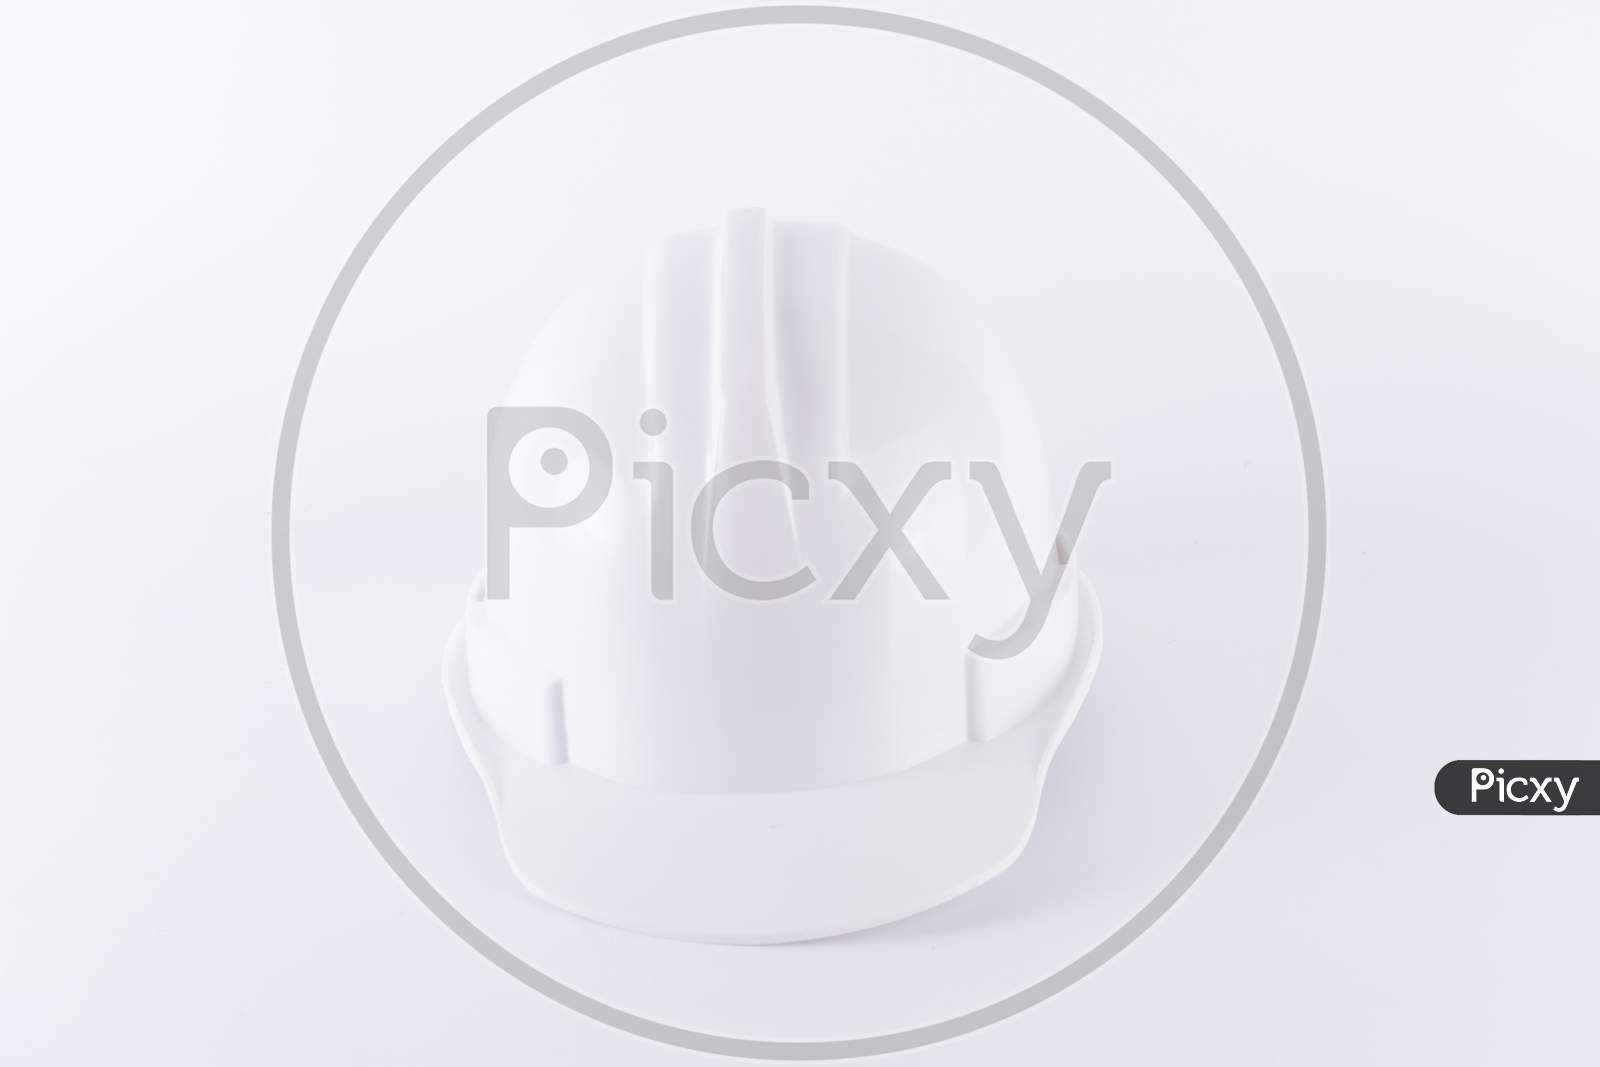 White Safety Helmet On White Background. Hard Hat And Thick Gloves On White Isolated Background. Safety Equipment Concept. Worker And Industrial Theme.